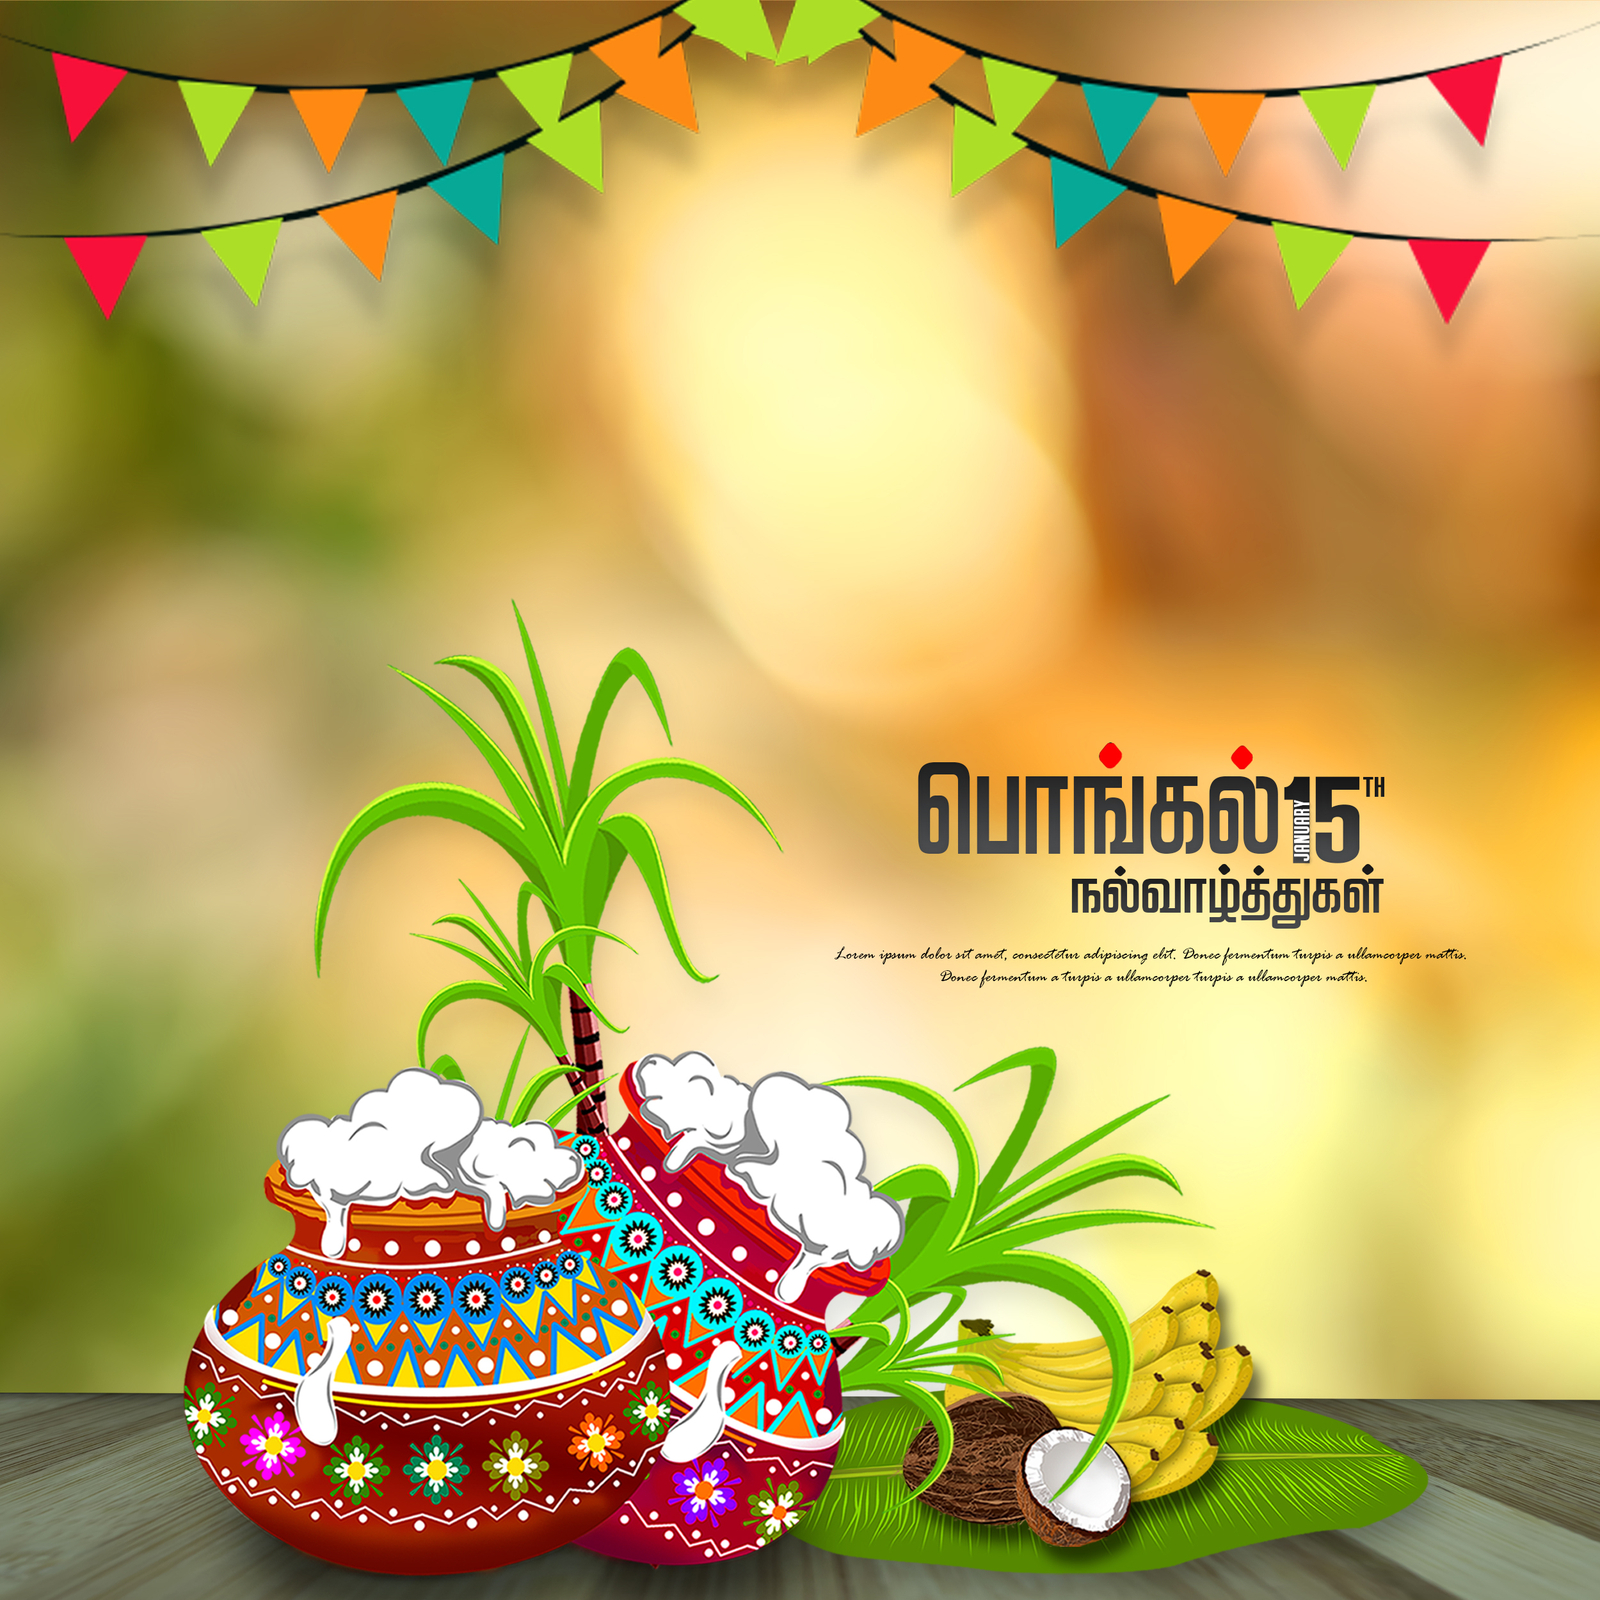 Happy pongal wishes images status quotes messages and whatsapp greetings to share in english and tamil